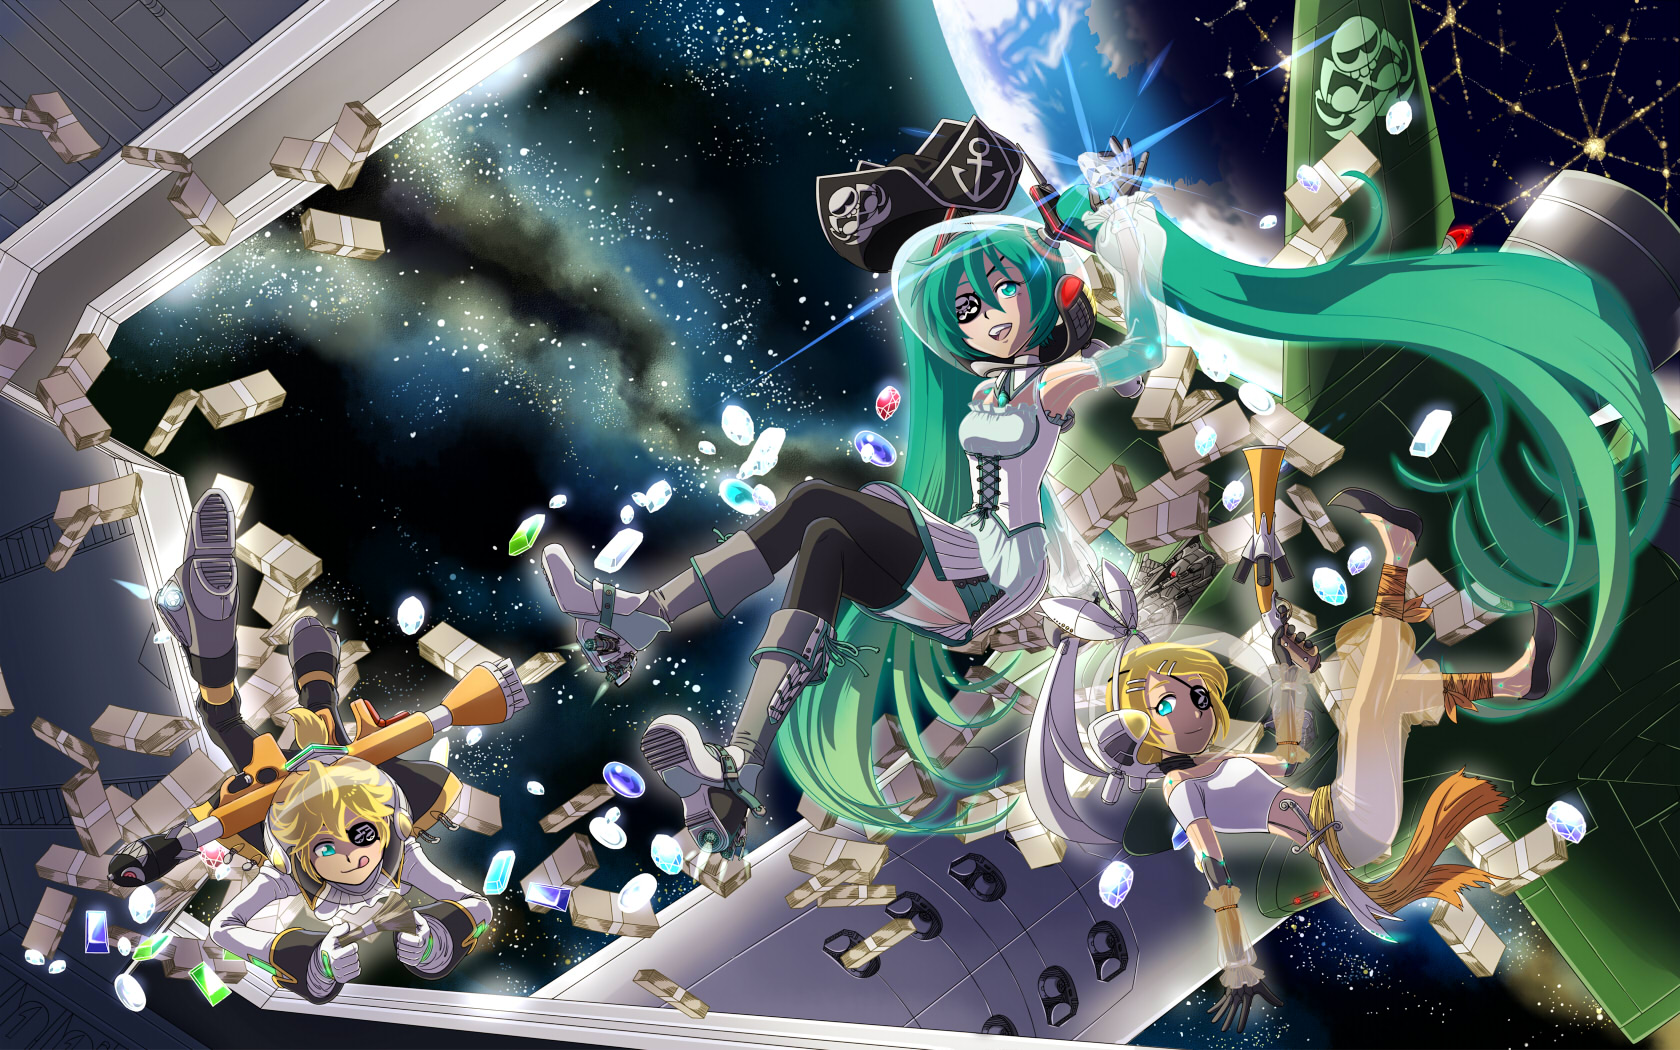 Space Pirates Vocaloid by robin01jp